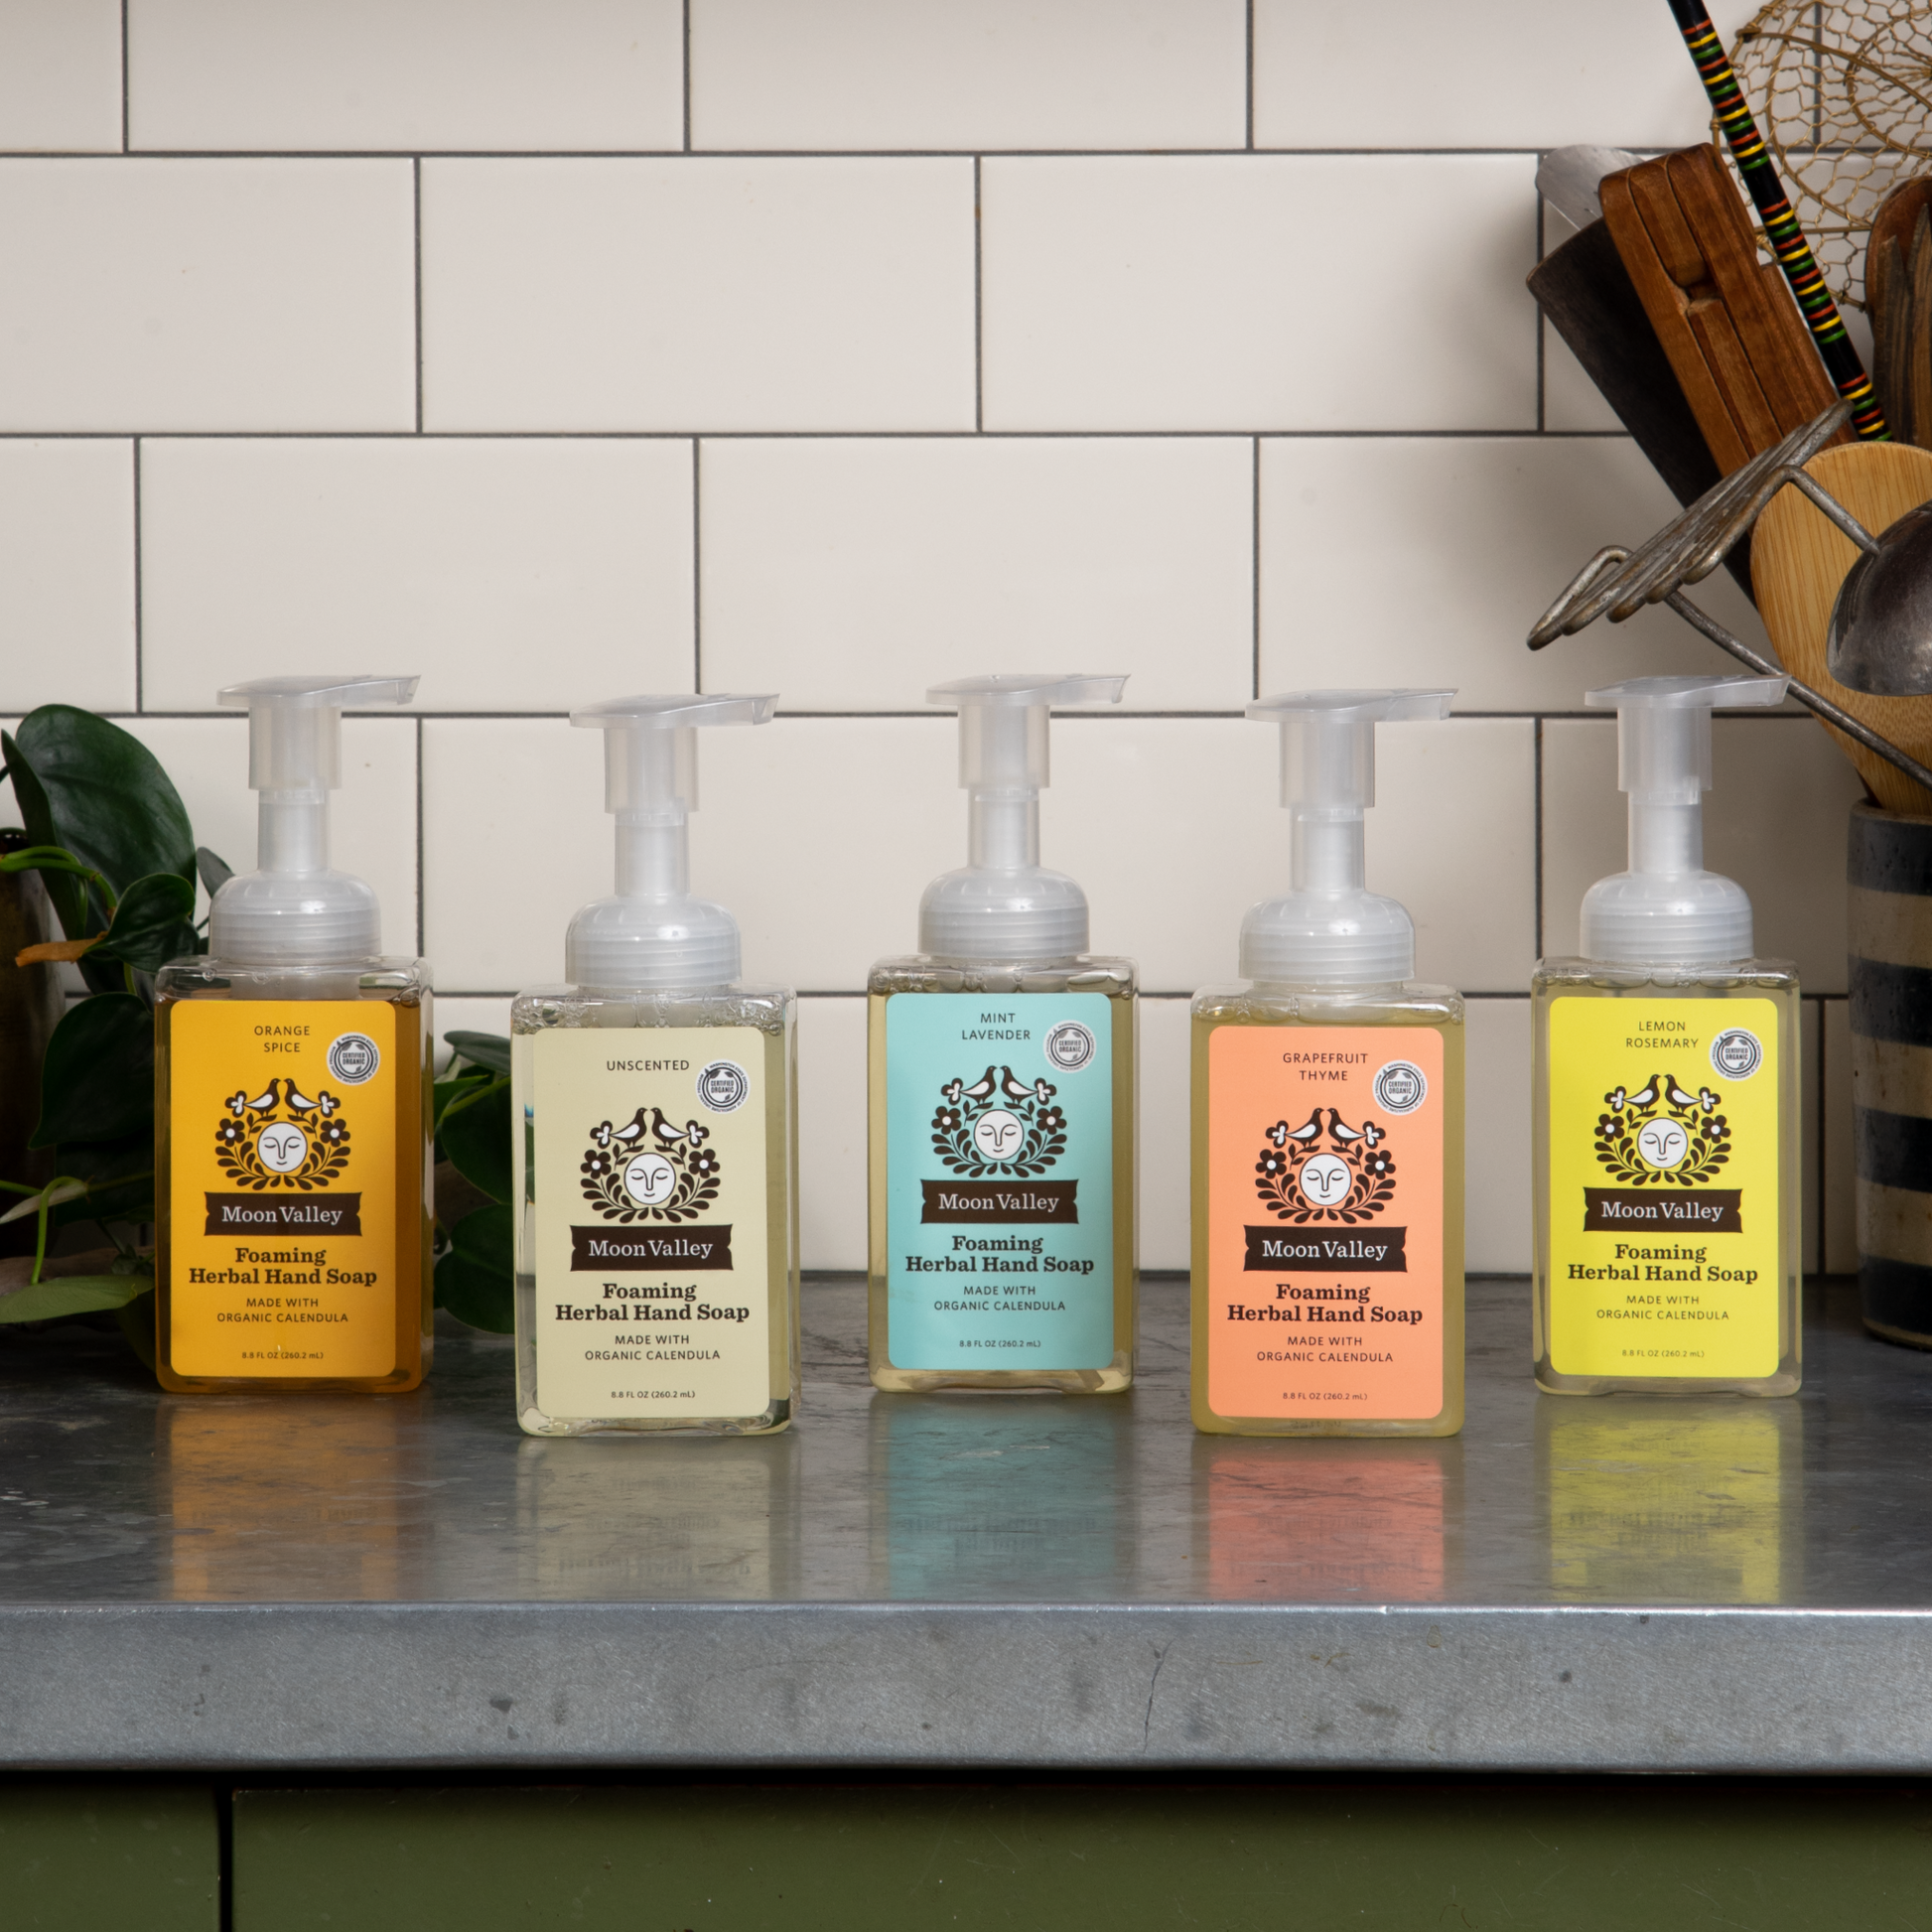 Moon Valley Organics Foaming Herbal Hand Soap Dispenser Bottles Assortment of all scents on a modern kitchen countertop